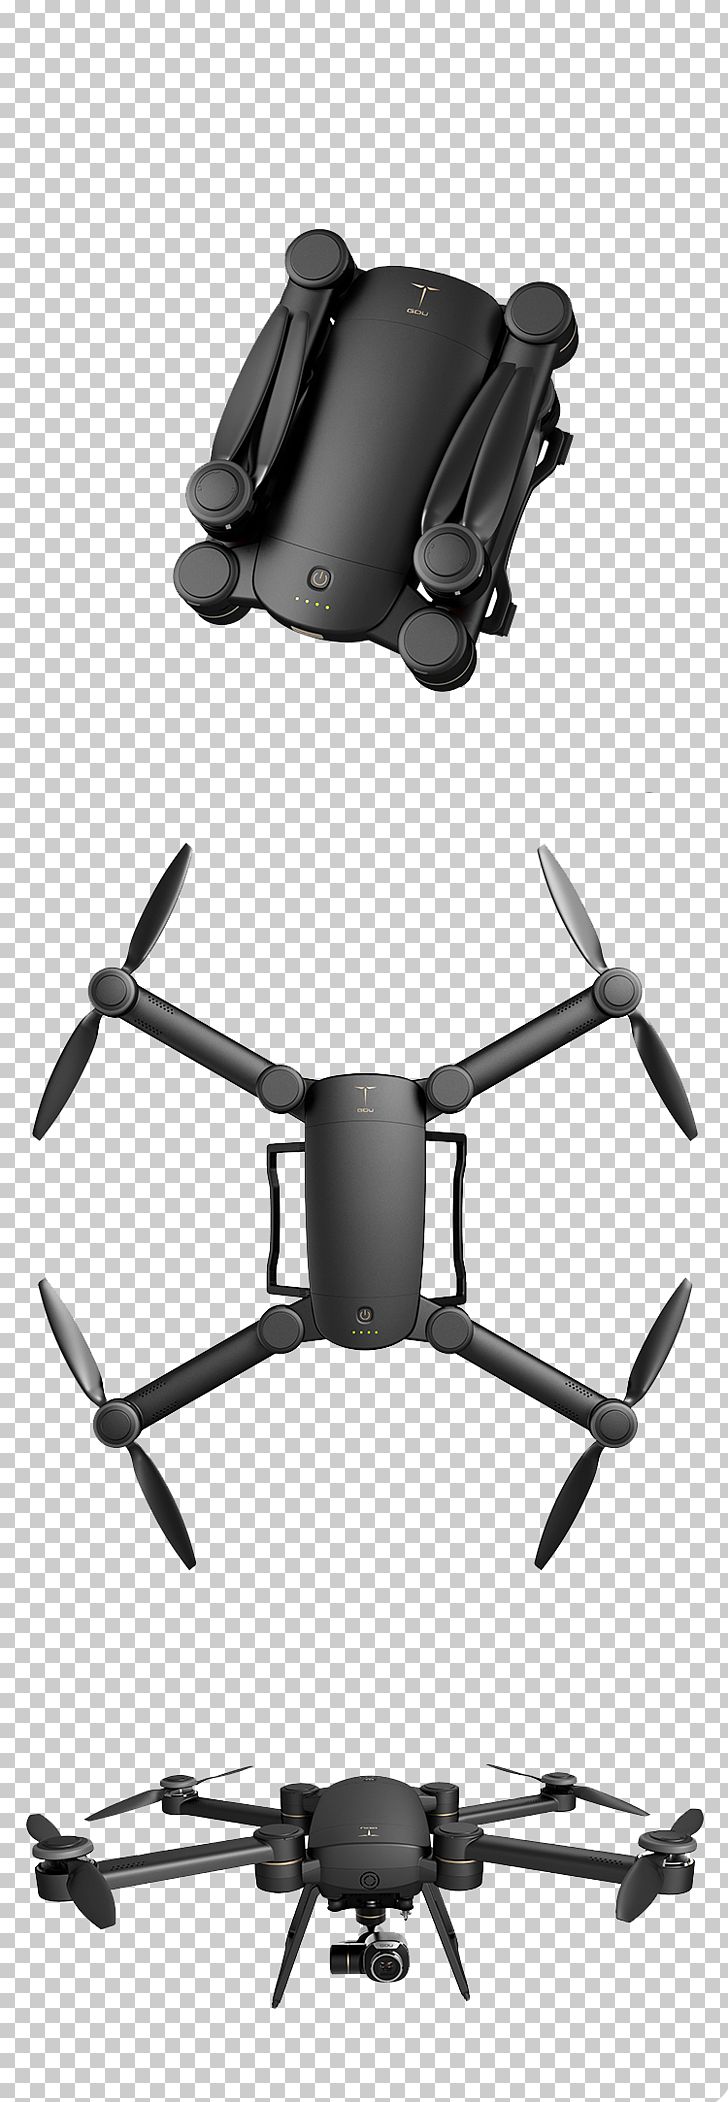 Unmanned Aerial Vehicle Quadcopter 4K Resolution Camera Gimbal PNG, Clipart, Airplane, Angle, Drones, Flight, Helicopter Free PNG Download